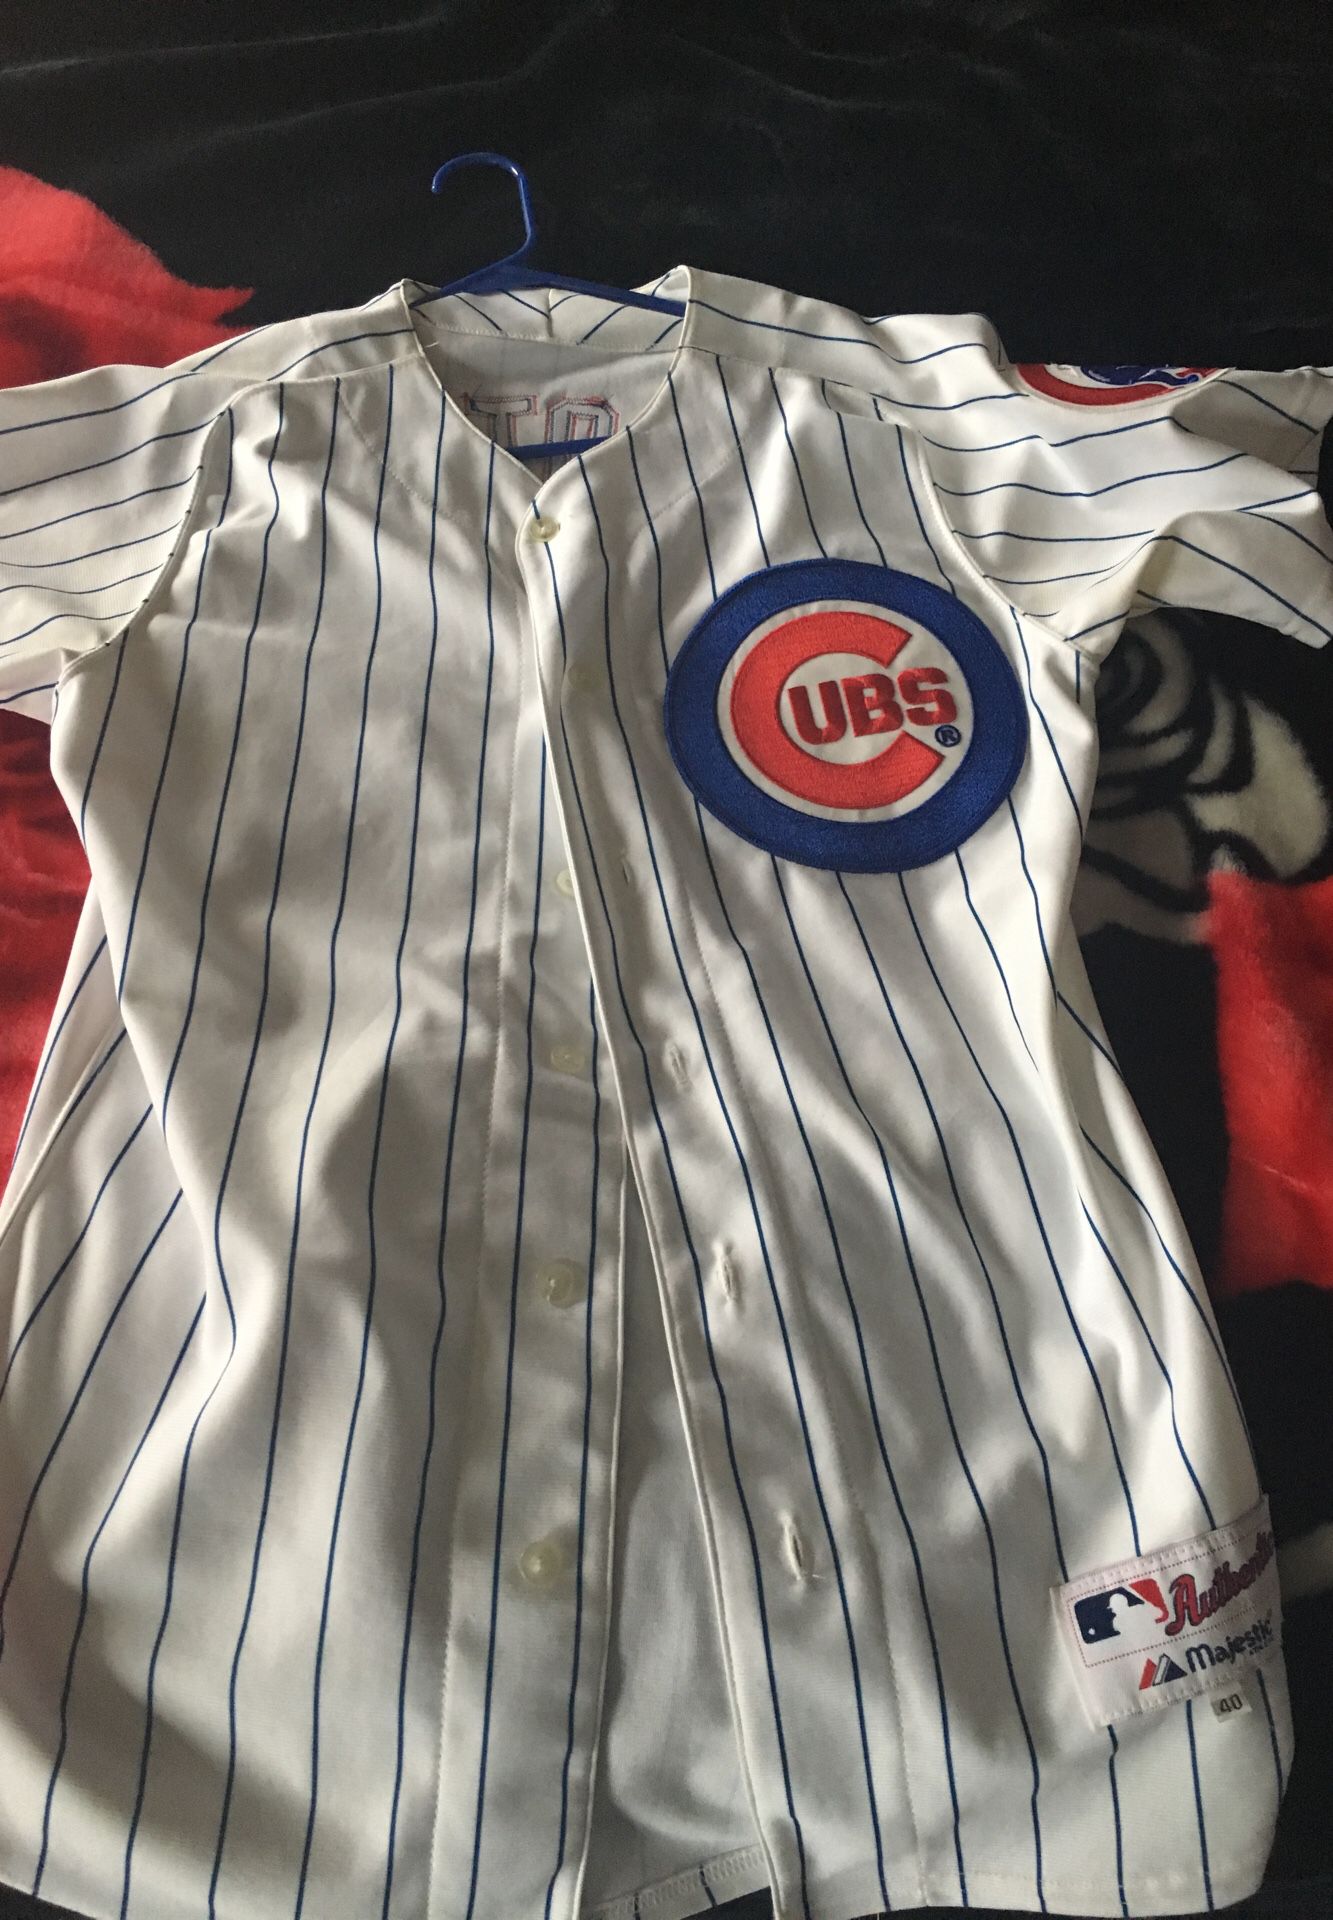 Chicago Cubs Jersey like new for Sale in Carol Stream, IL - OfferUp